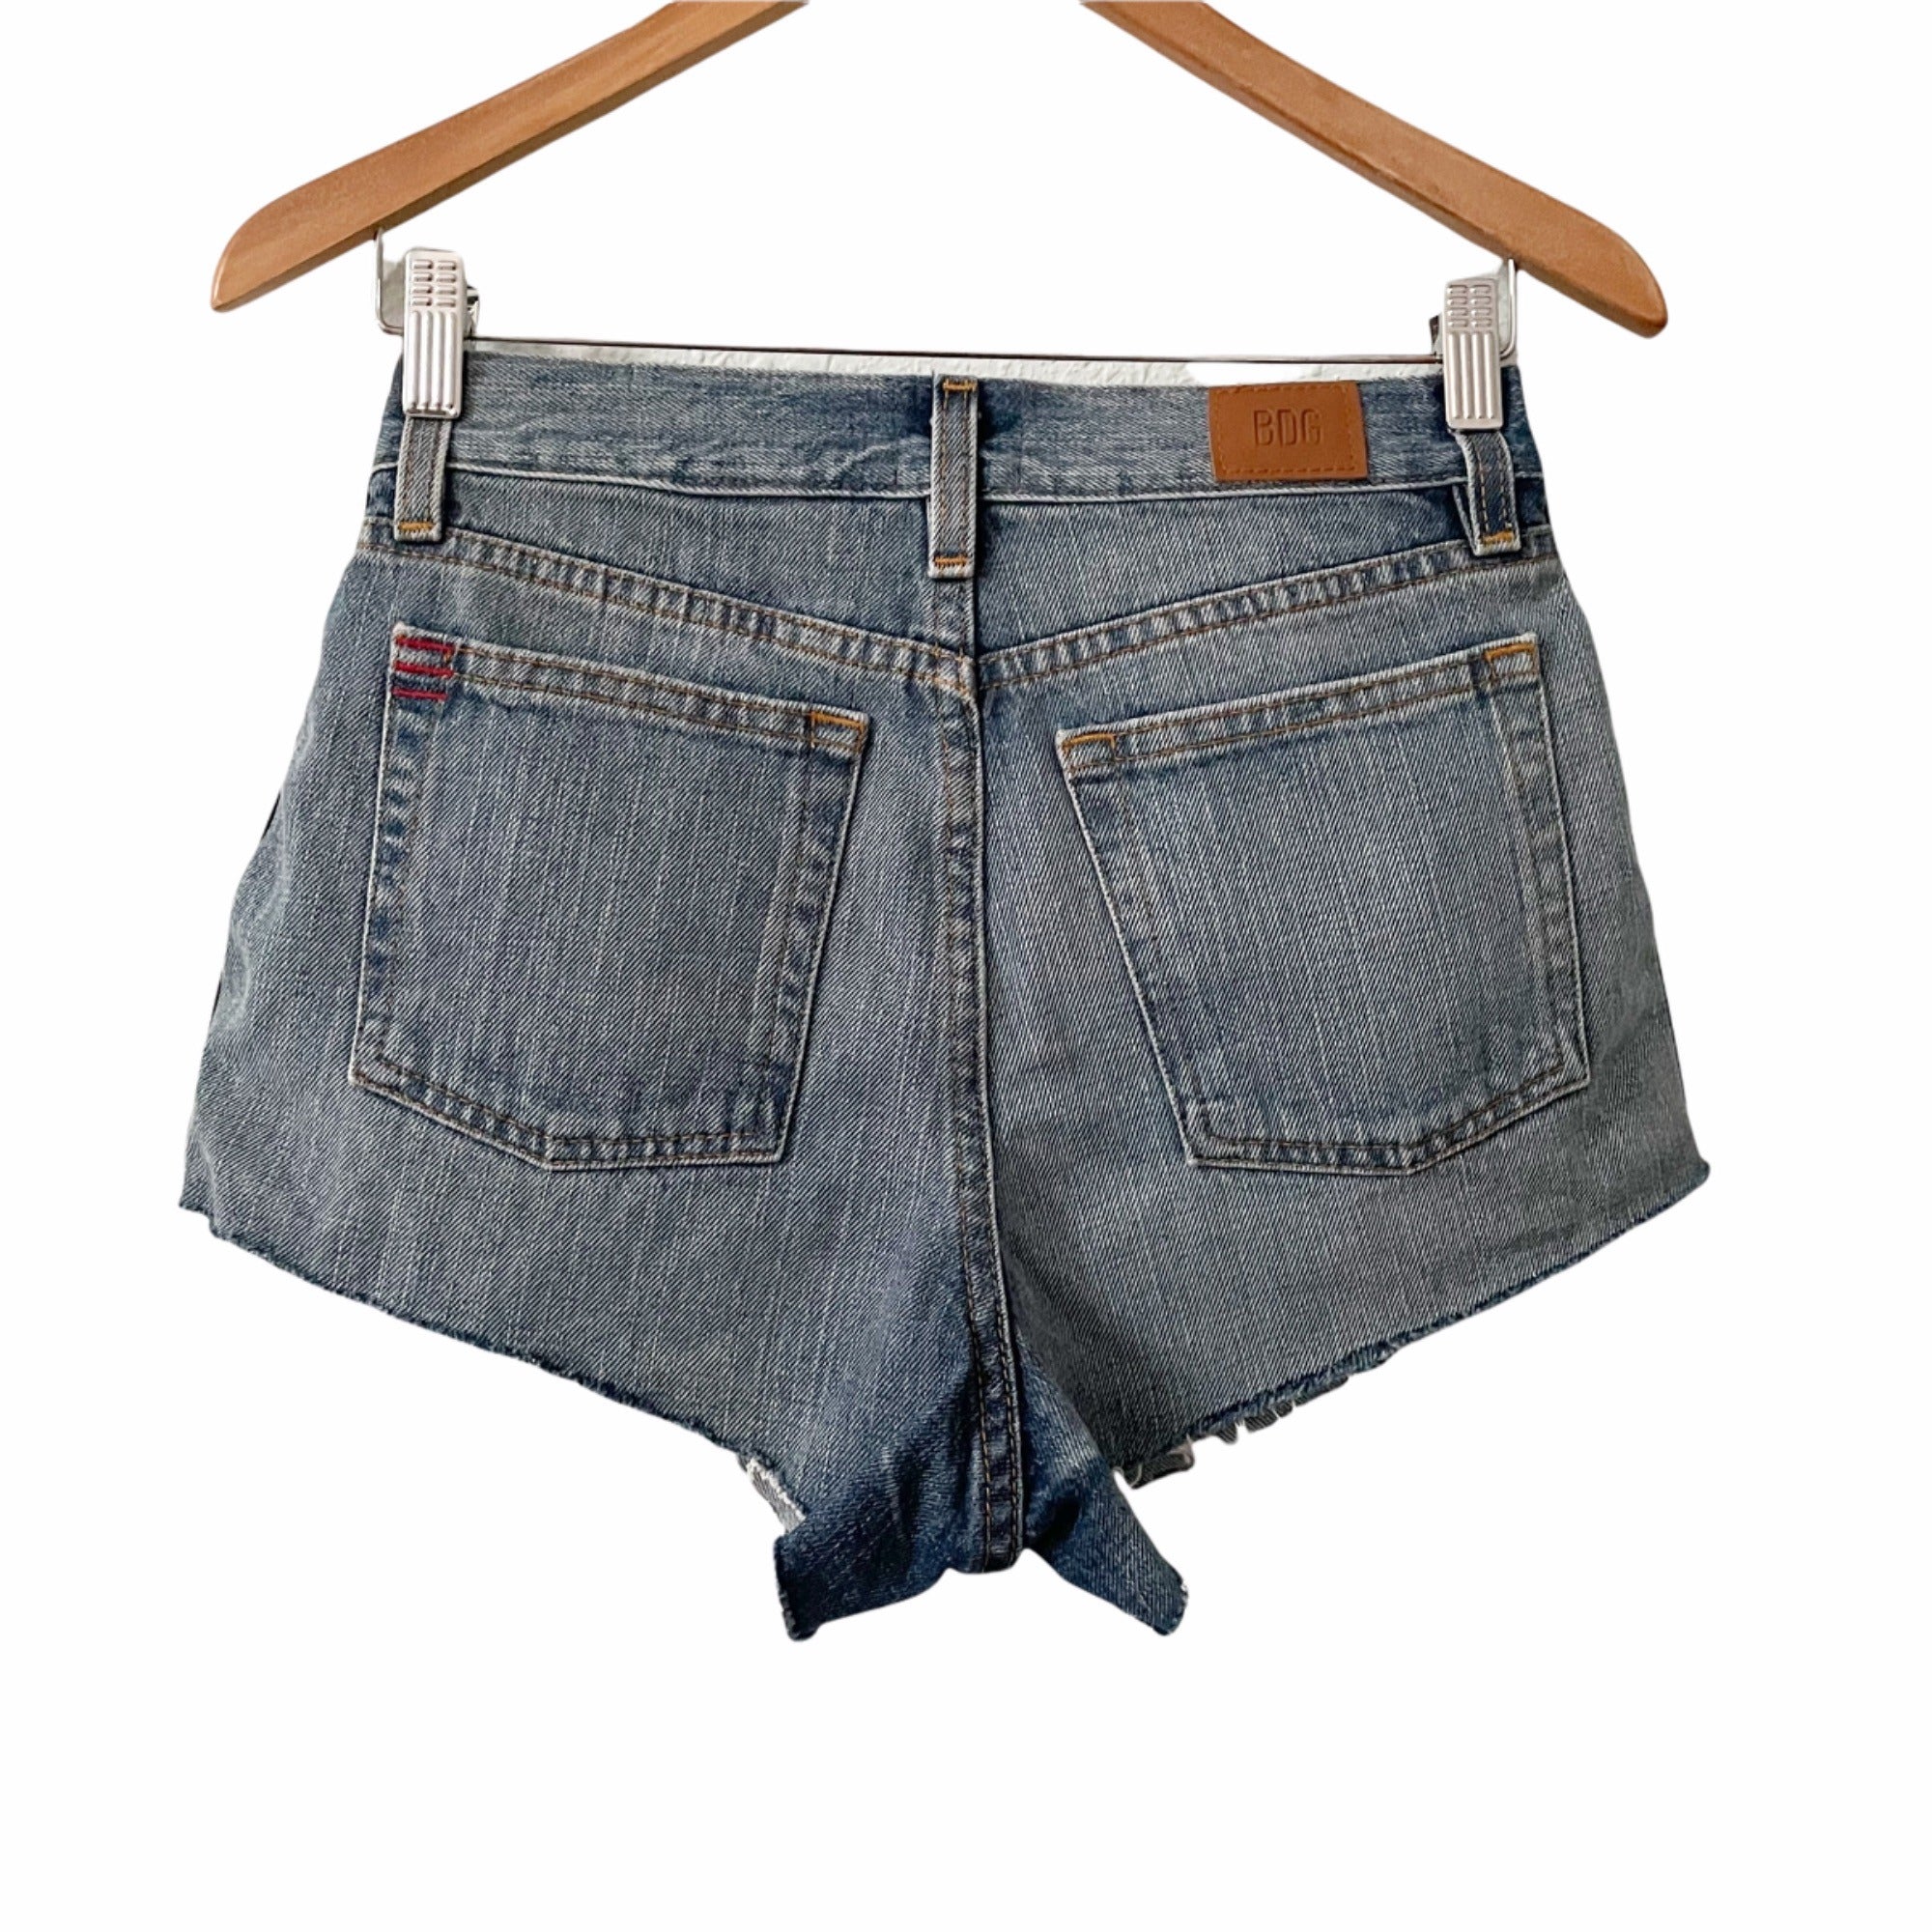 Urban Outfitters BDG Distressed Hem Denim Shorts  Pacific City